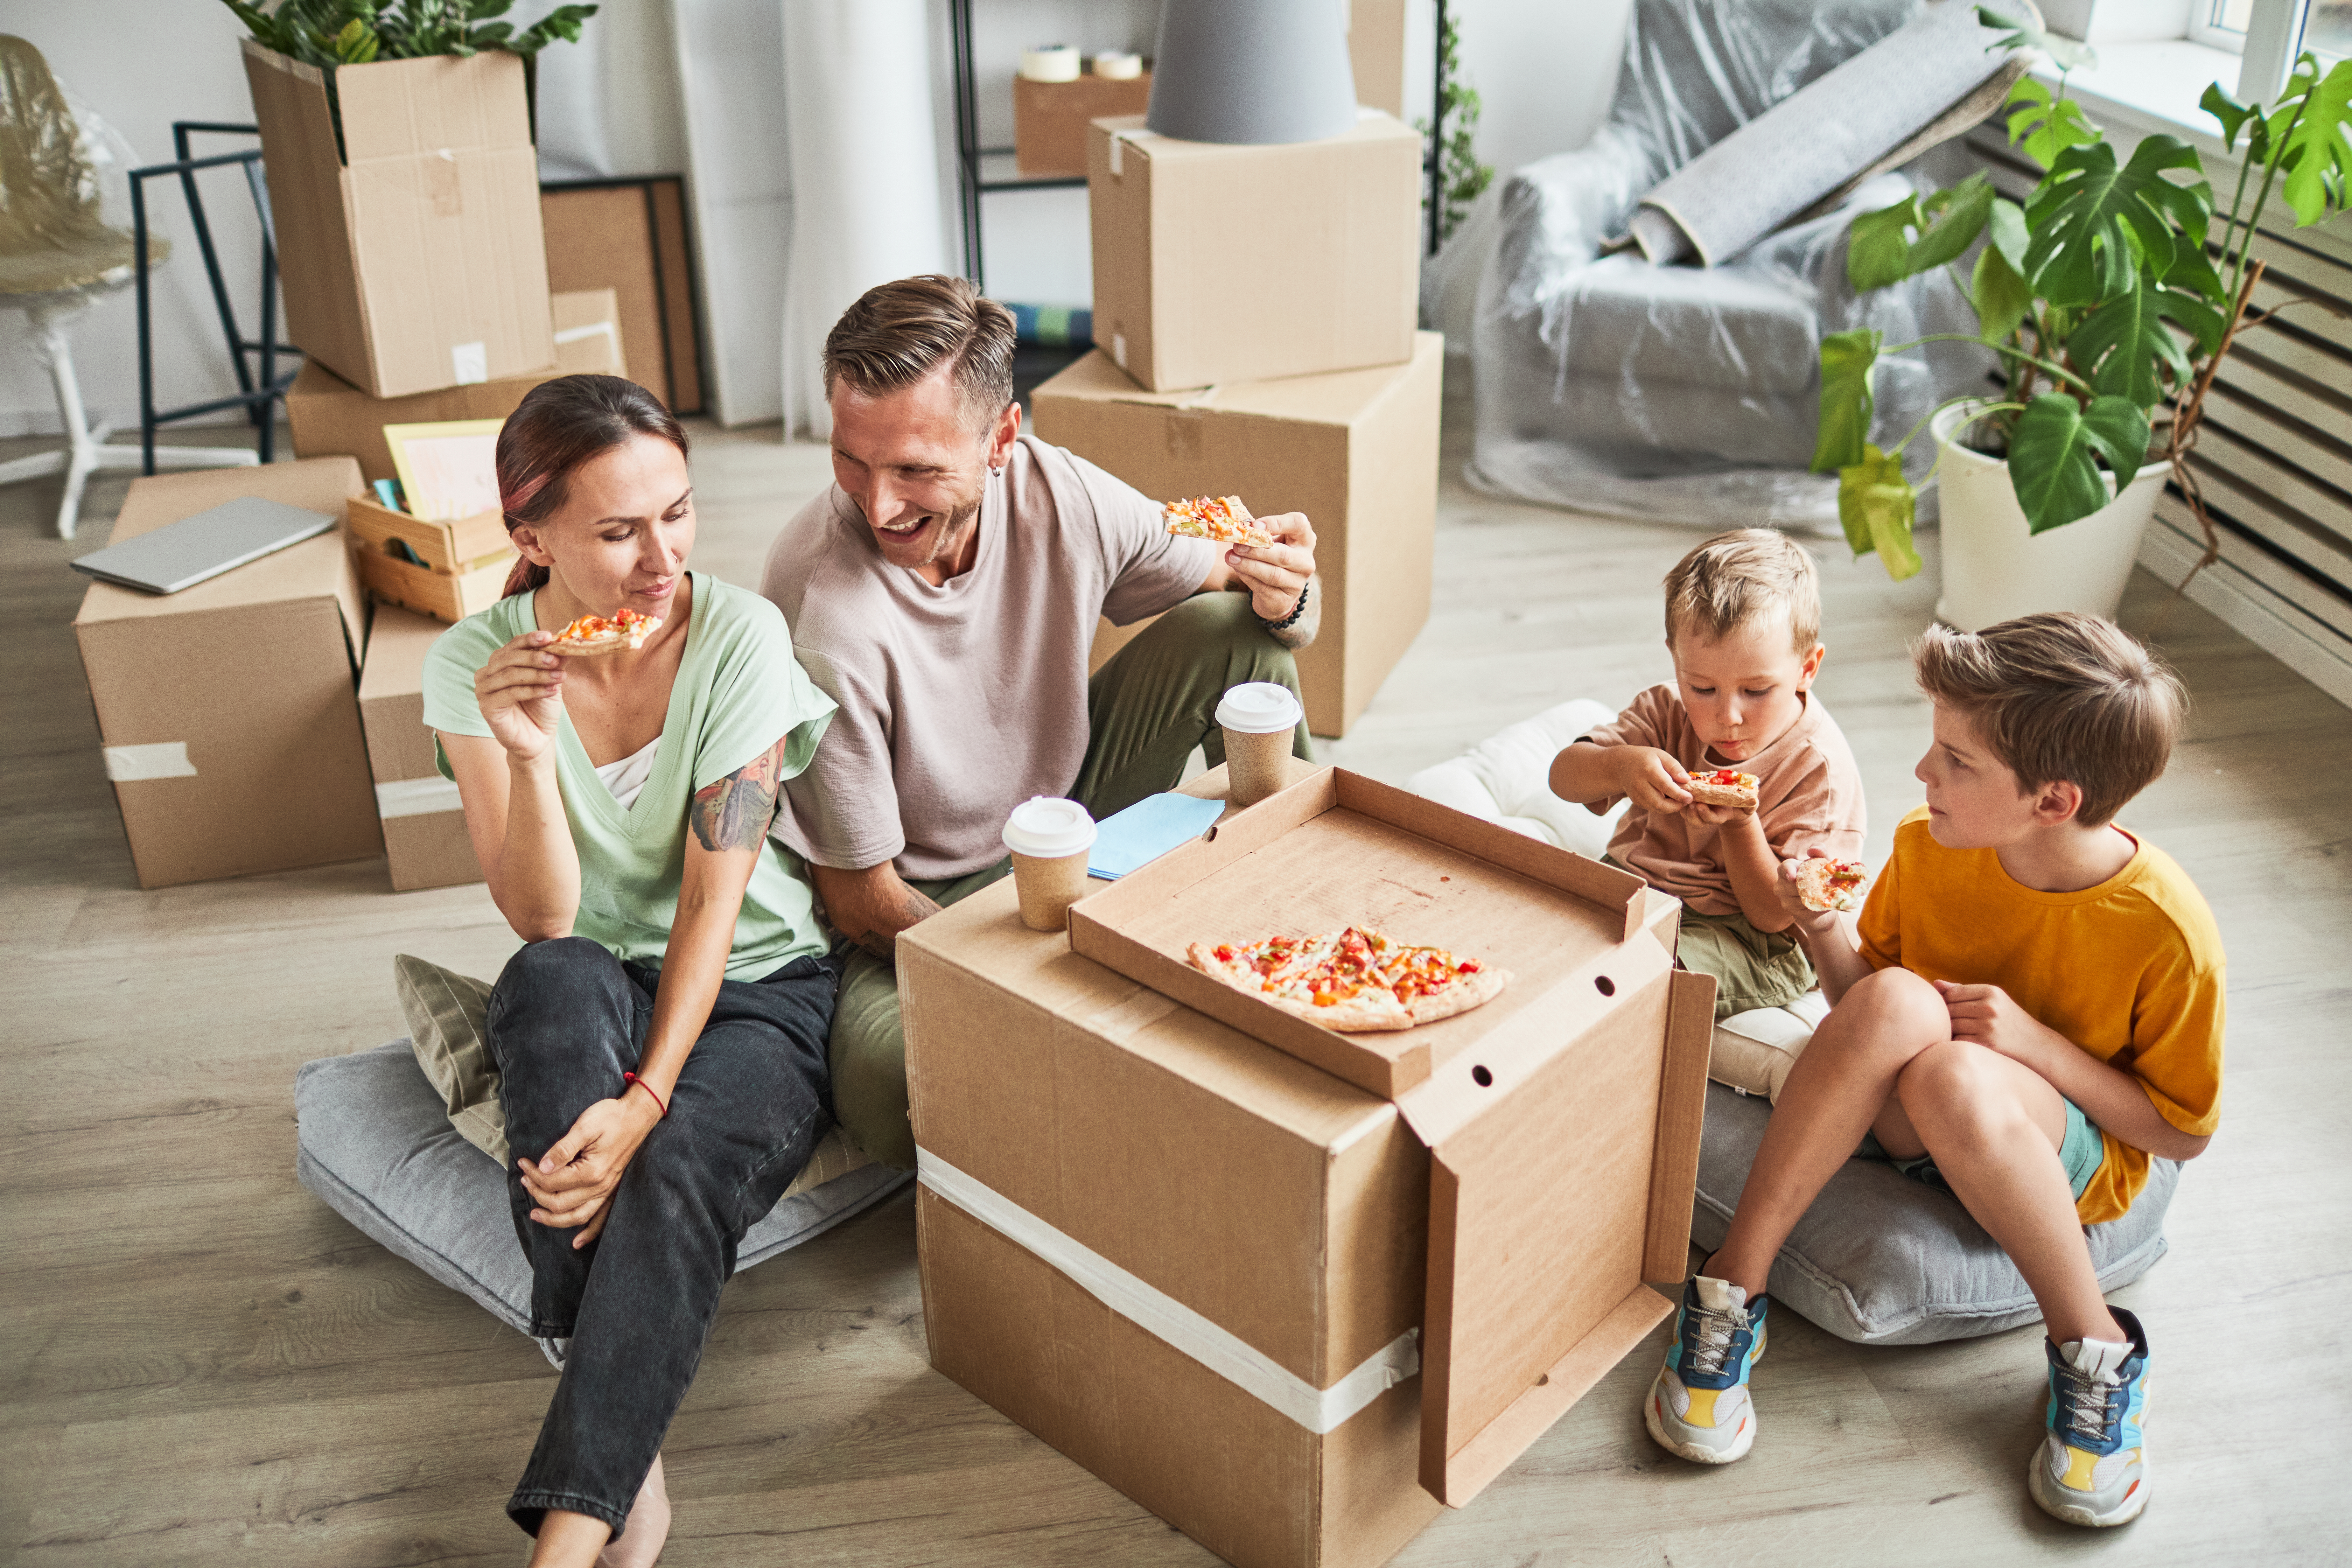 Family eating pizza off of a box while moving in to their new home.